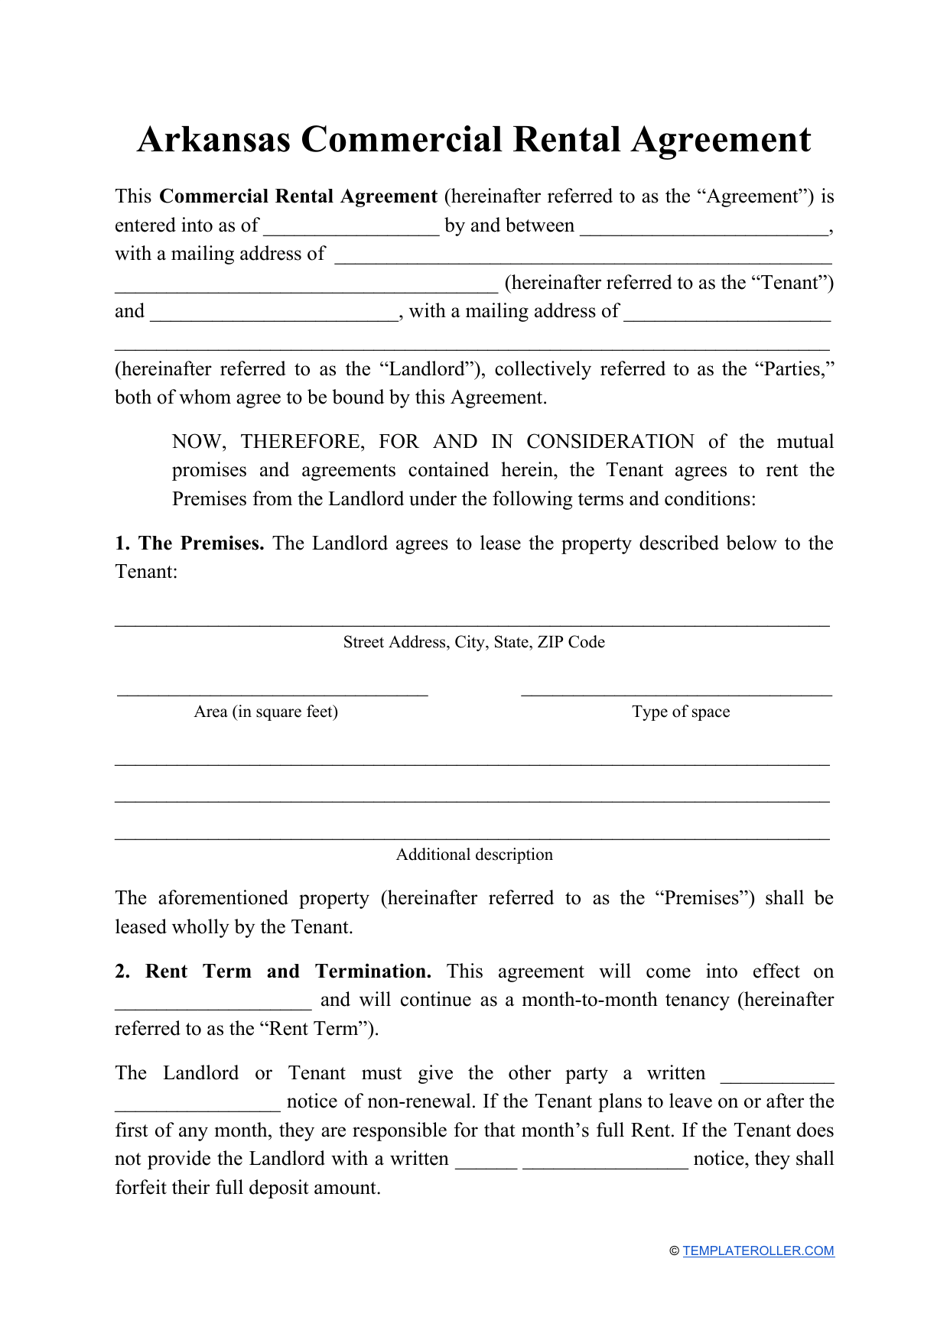 Commercial Rental Agreement Template - Arkansas, Page 1